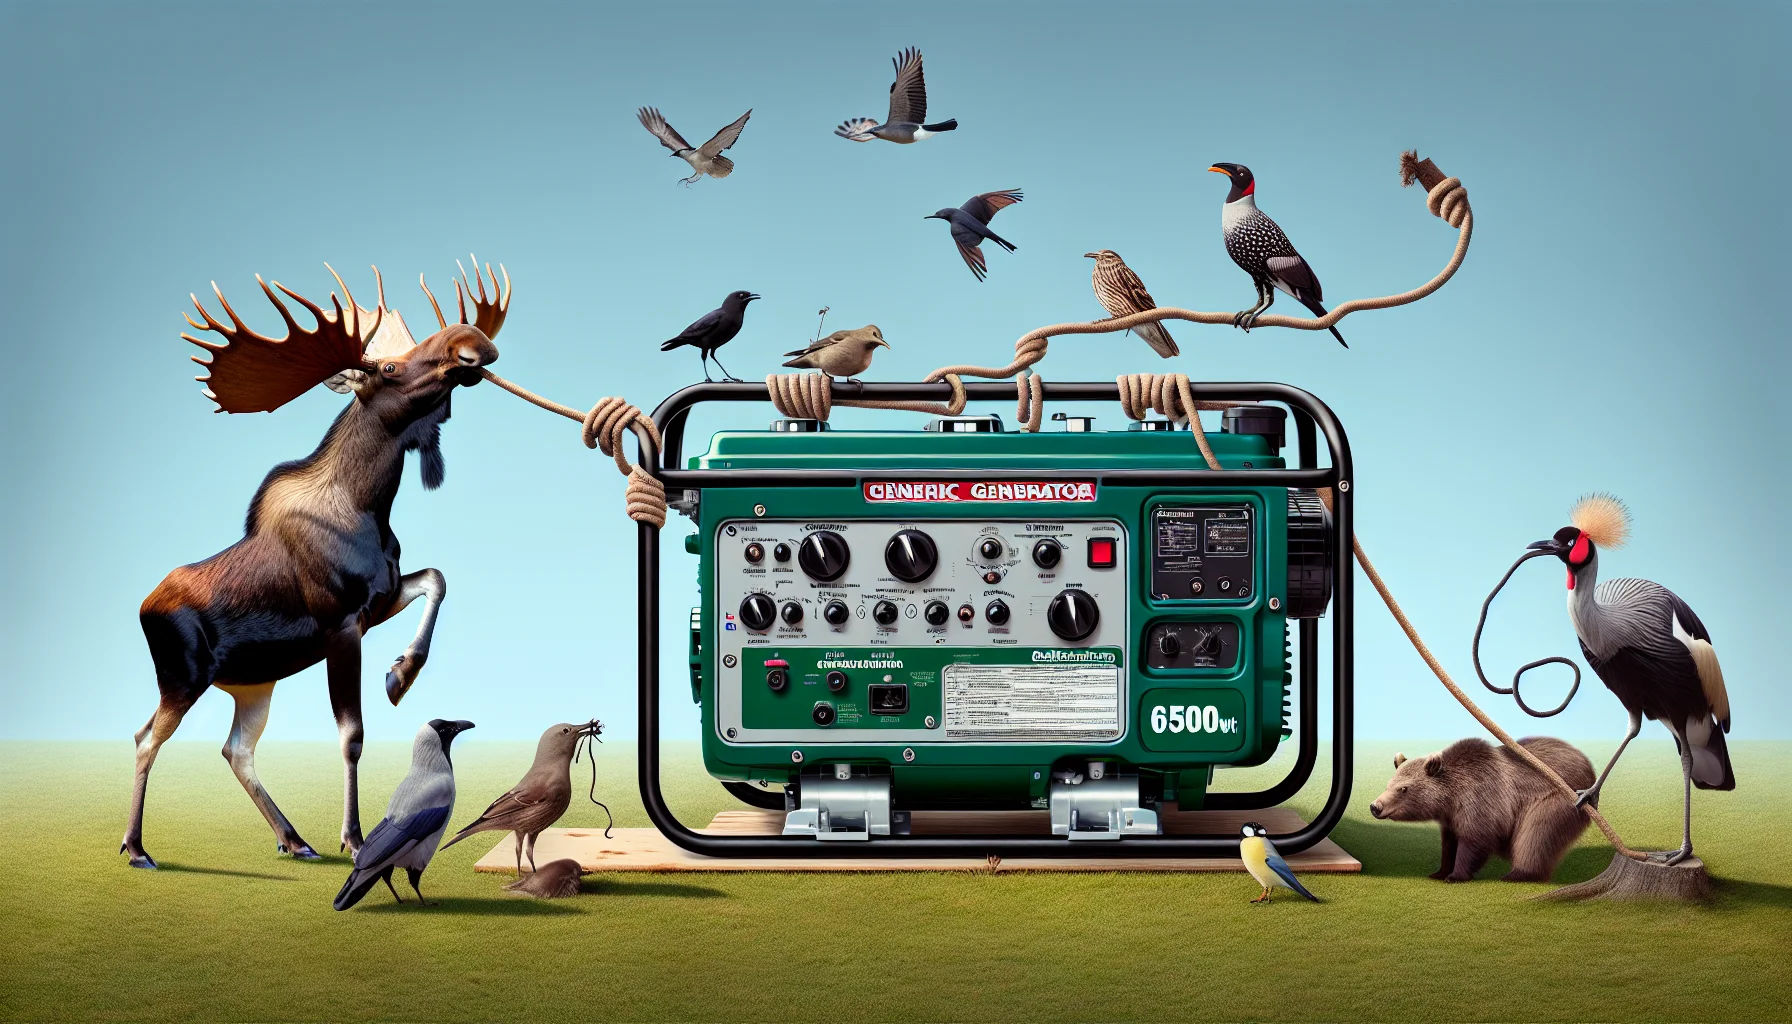 Create a detailed and humorous image featuring an unnamed generic 6500-watt generator. In the image, present the generator in a clever situation that urges people to consider generating their own electricity. Picture the generator in nature, perhaps being playfully rotated by a group of animals, showing their interest in generating power. A moose might be using the pull cord like it's playing tug of war, for instance, while birds perch on top, seemingly peering at the various control knobs.